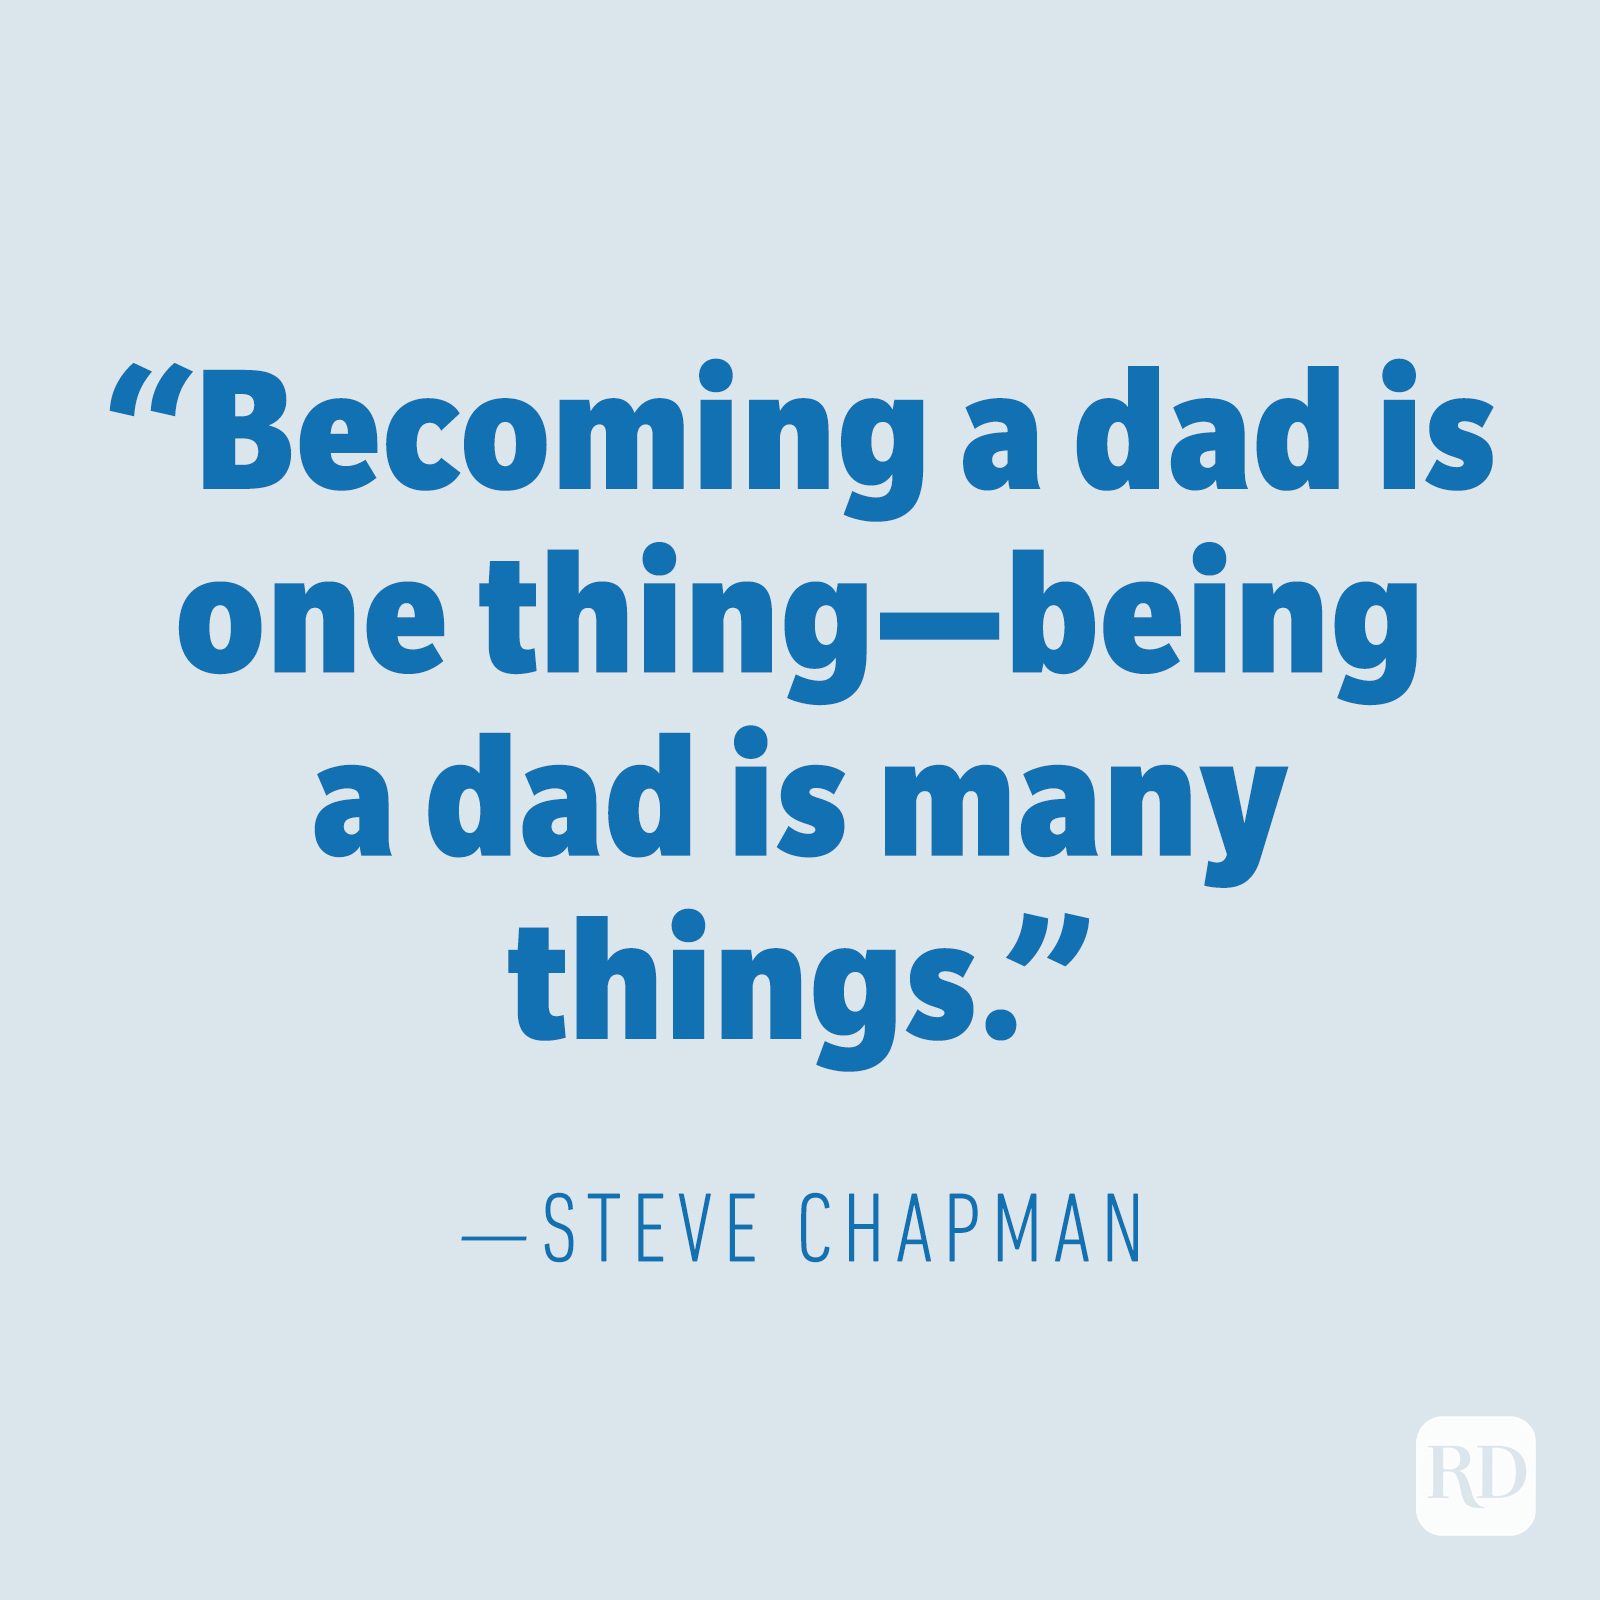 quotes about sons and fathers